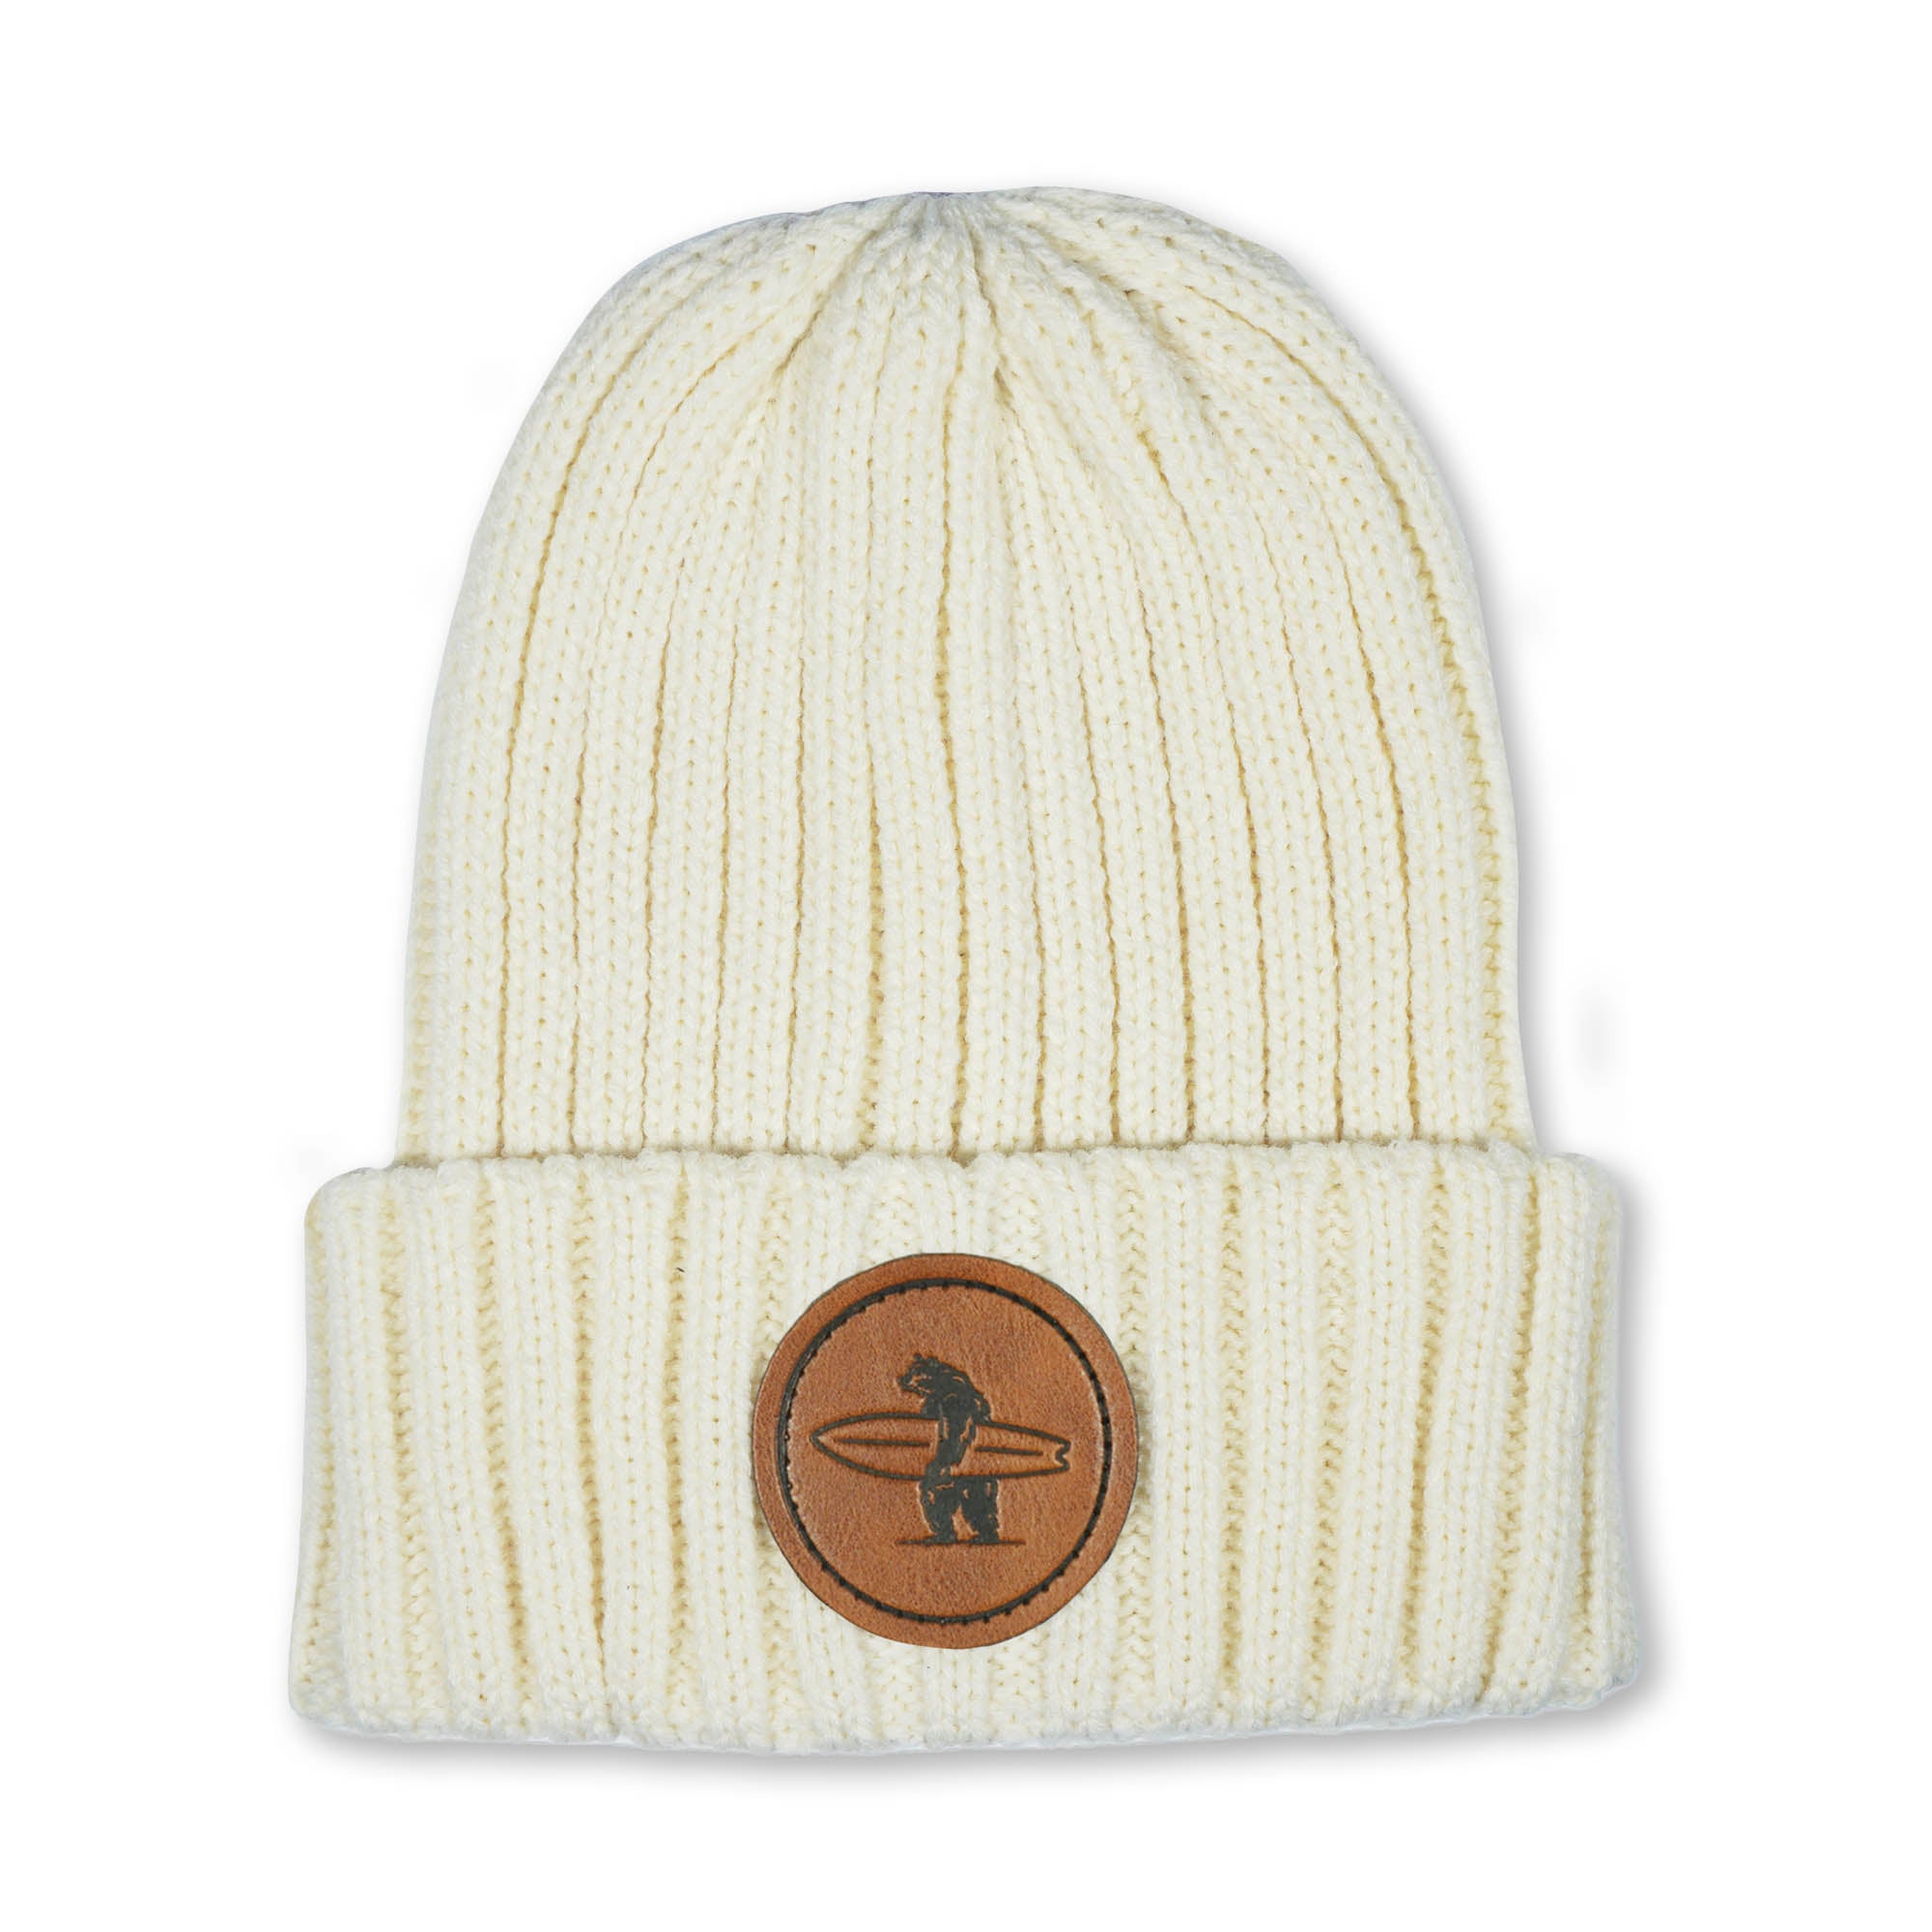 White Pismo Beanie by Everyday California with vegan leather patch